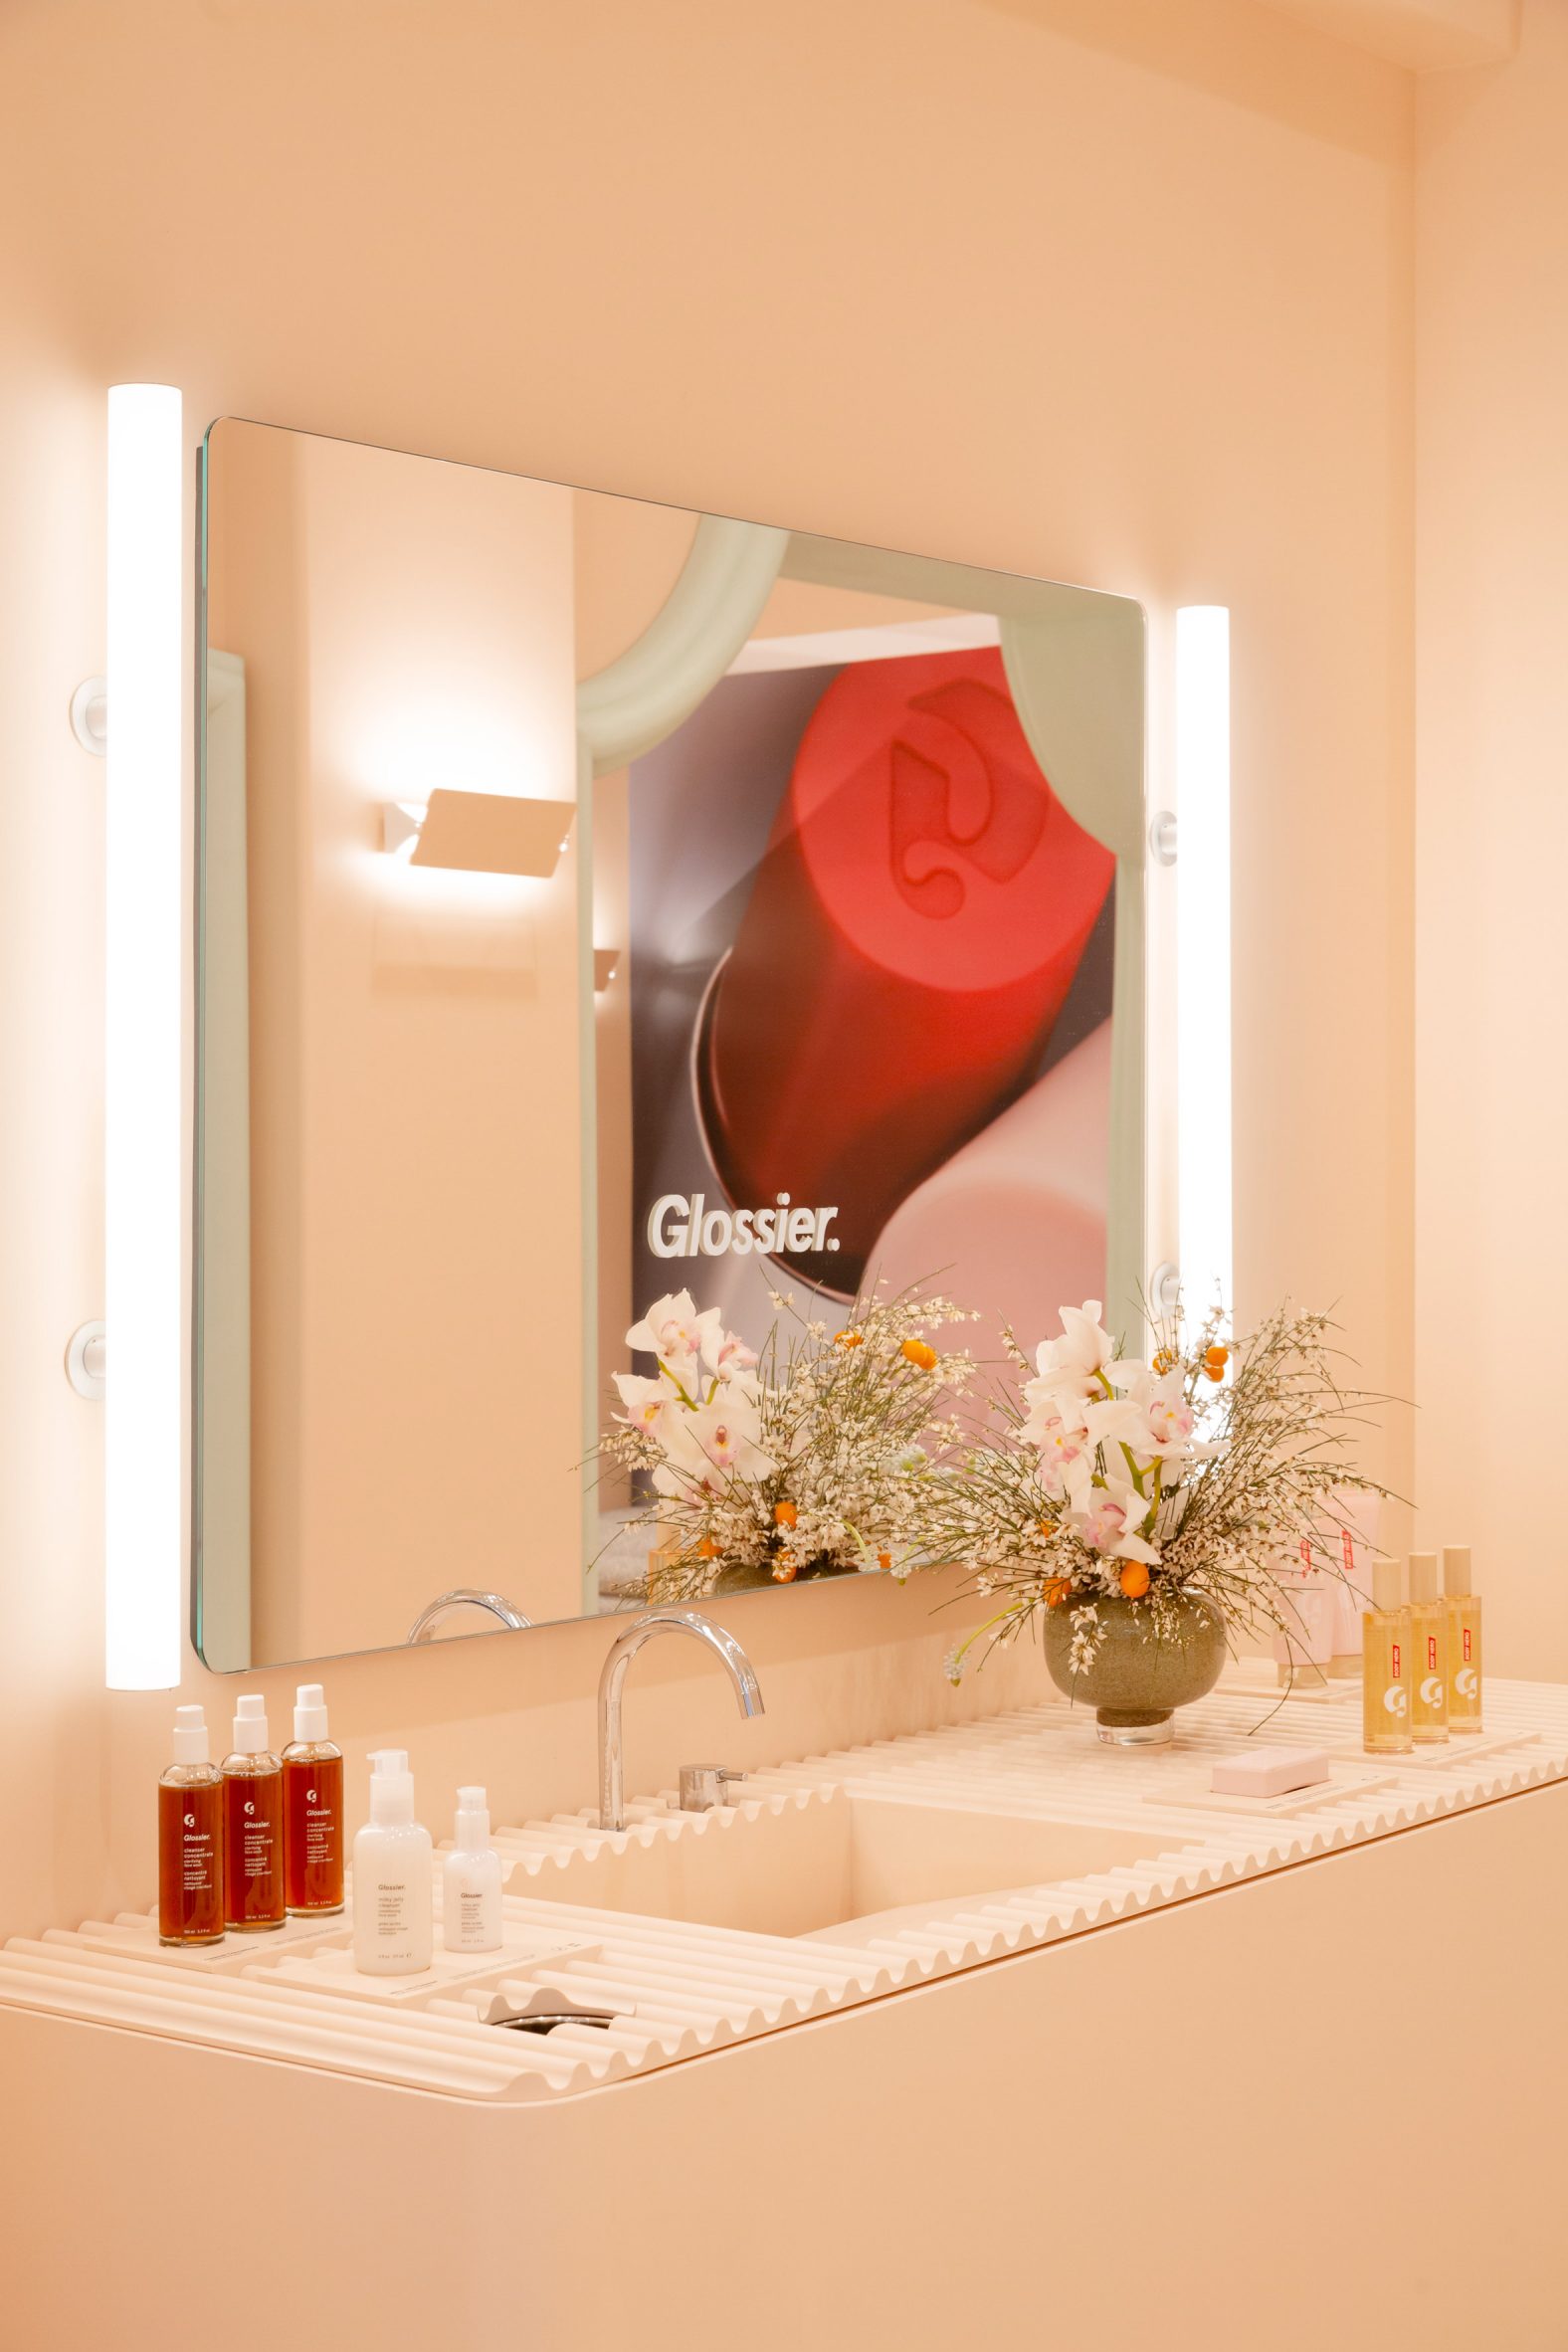 Product display in front of large mirror